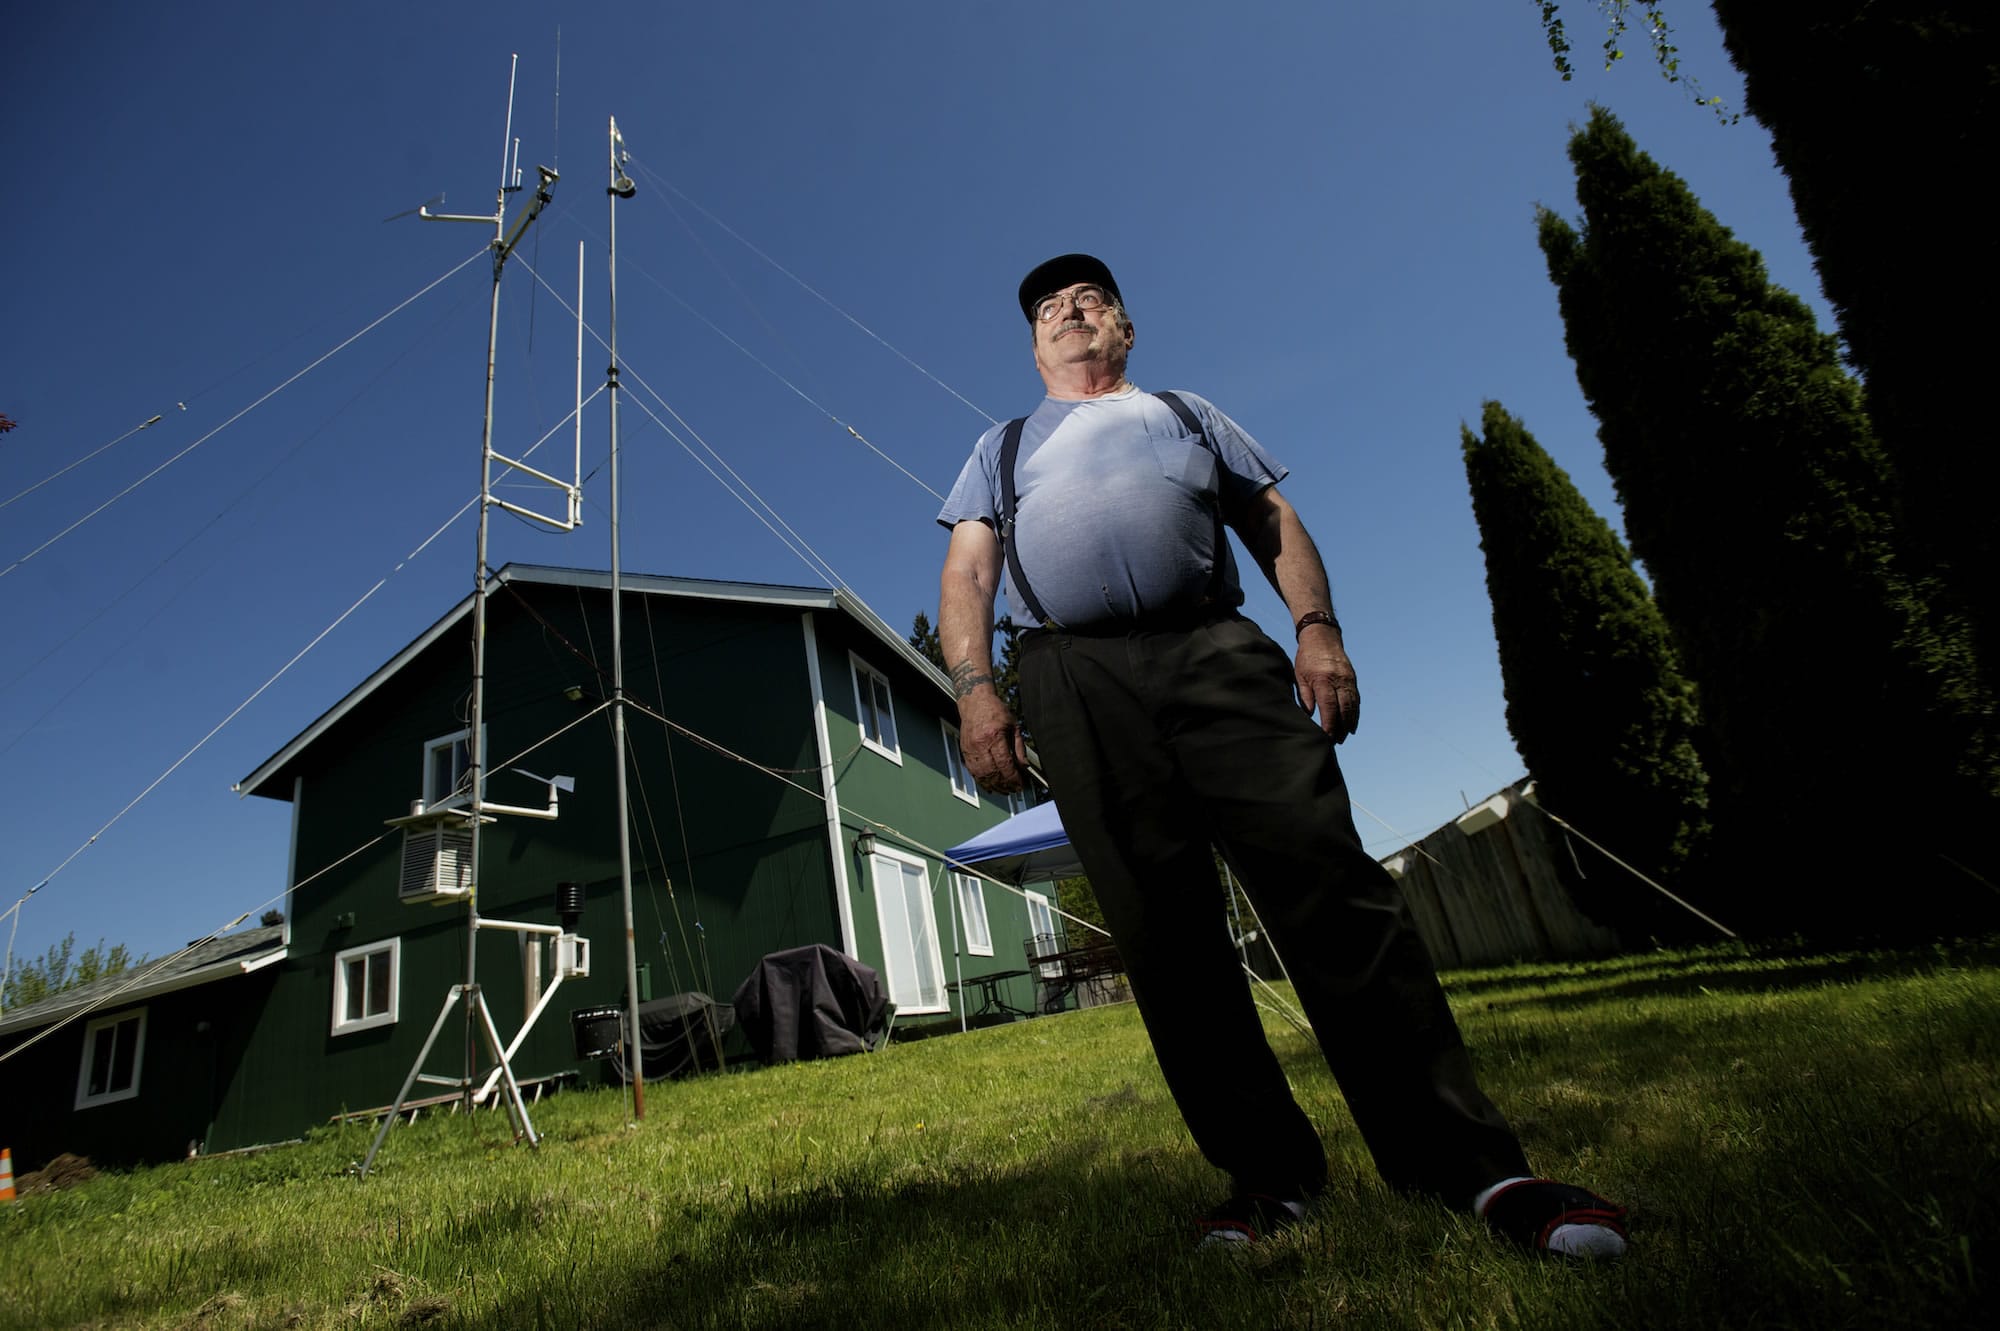 Vancouver resident Ron Baldie is a volunteer weather spotter for the National Weather Service.